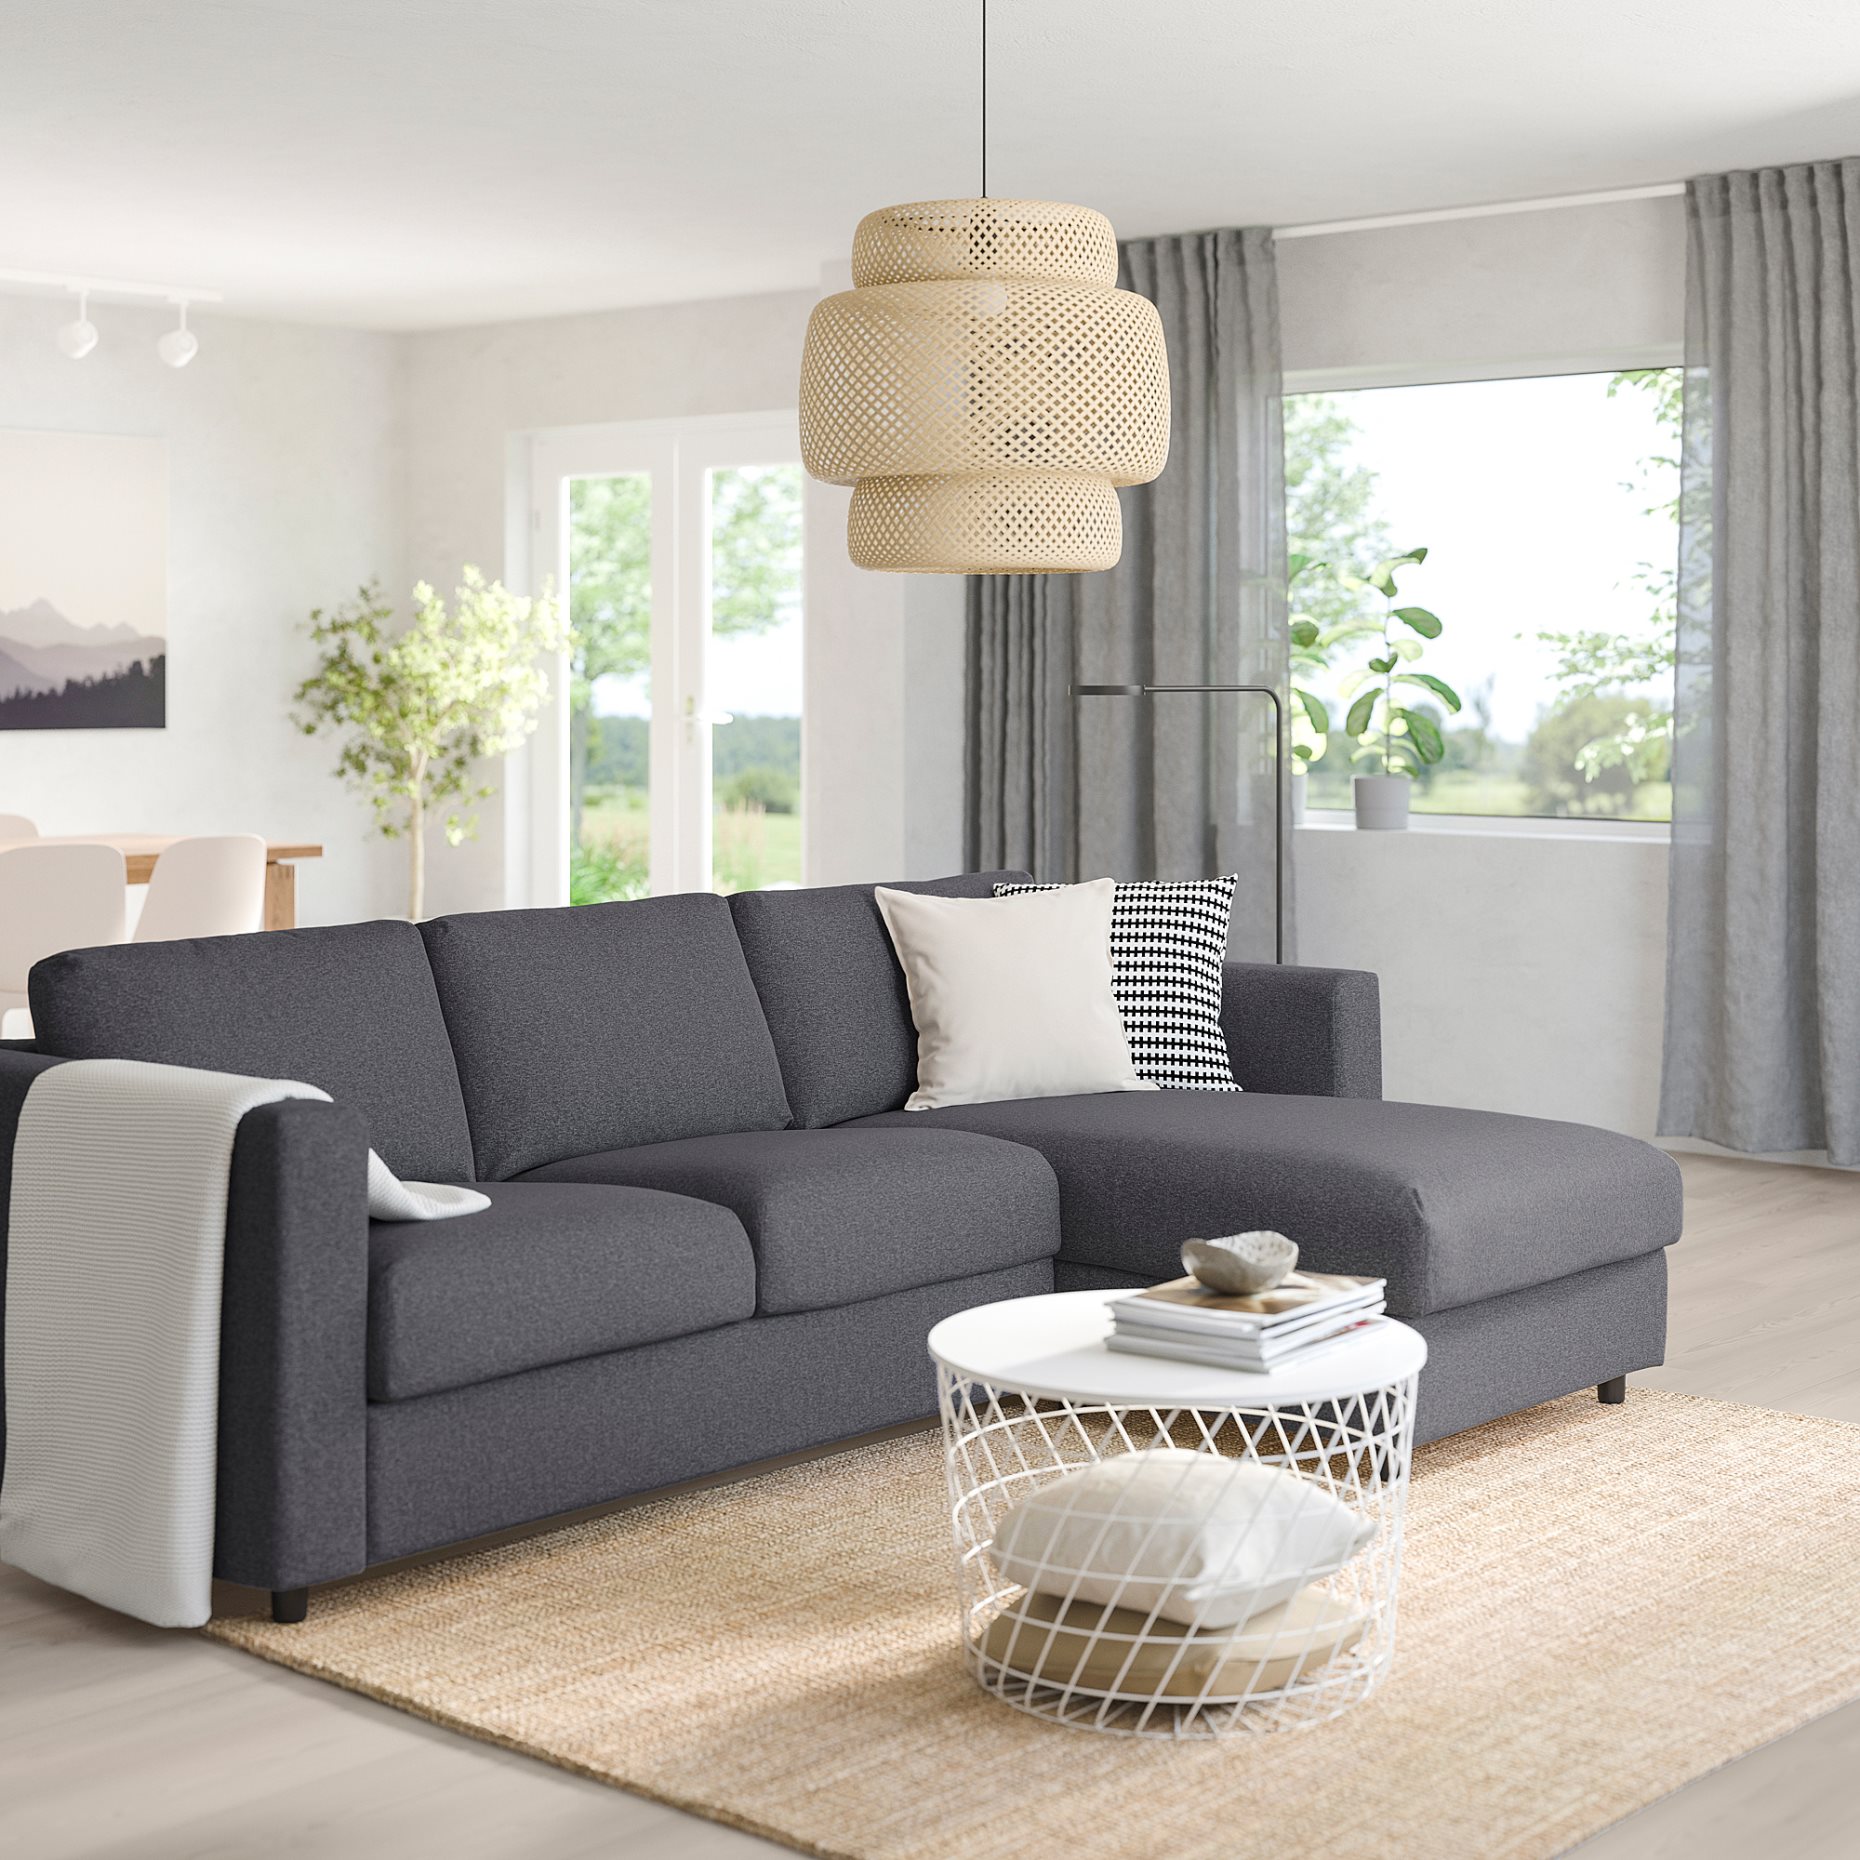 VIMLE, 3-seat sofa with chaise longue, 393.991.12